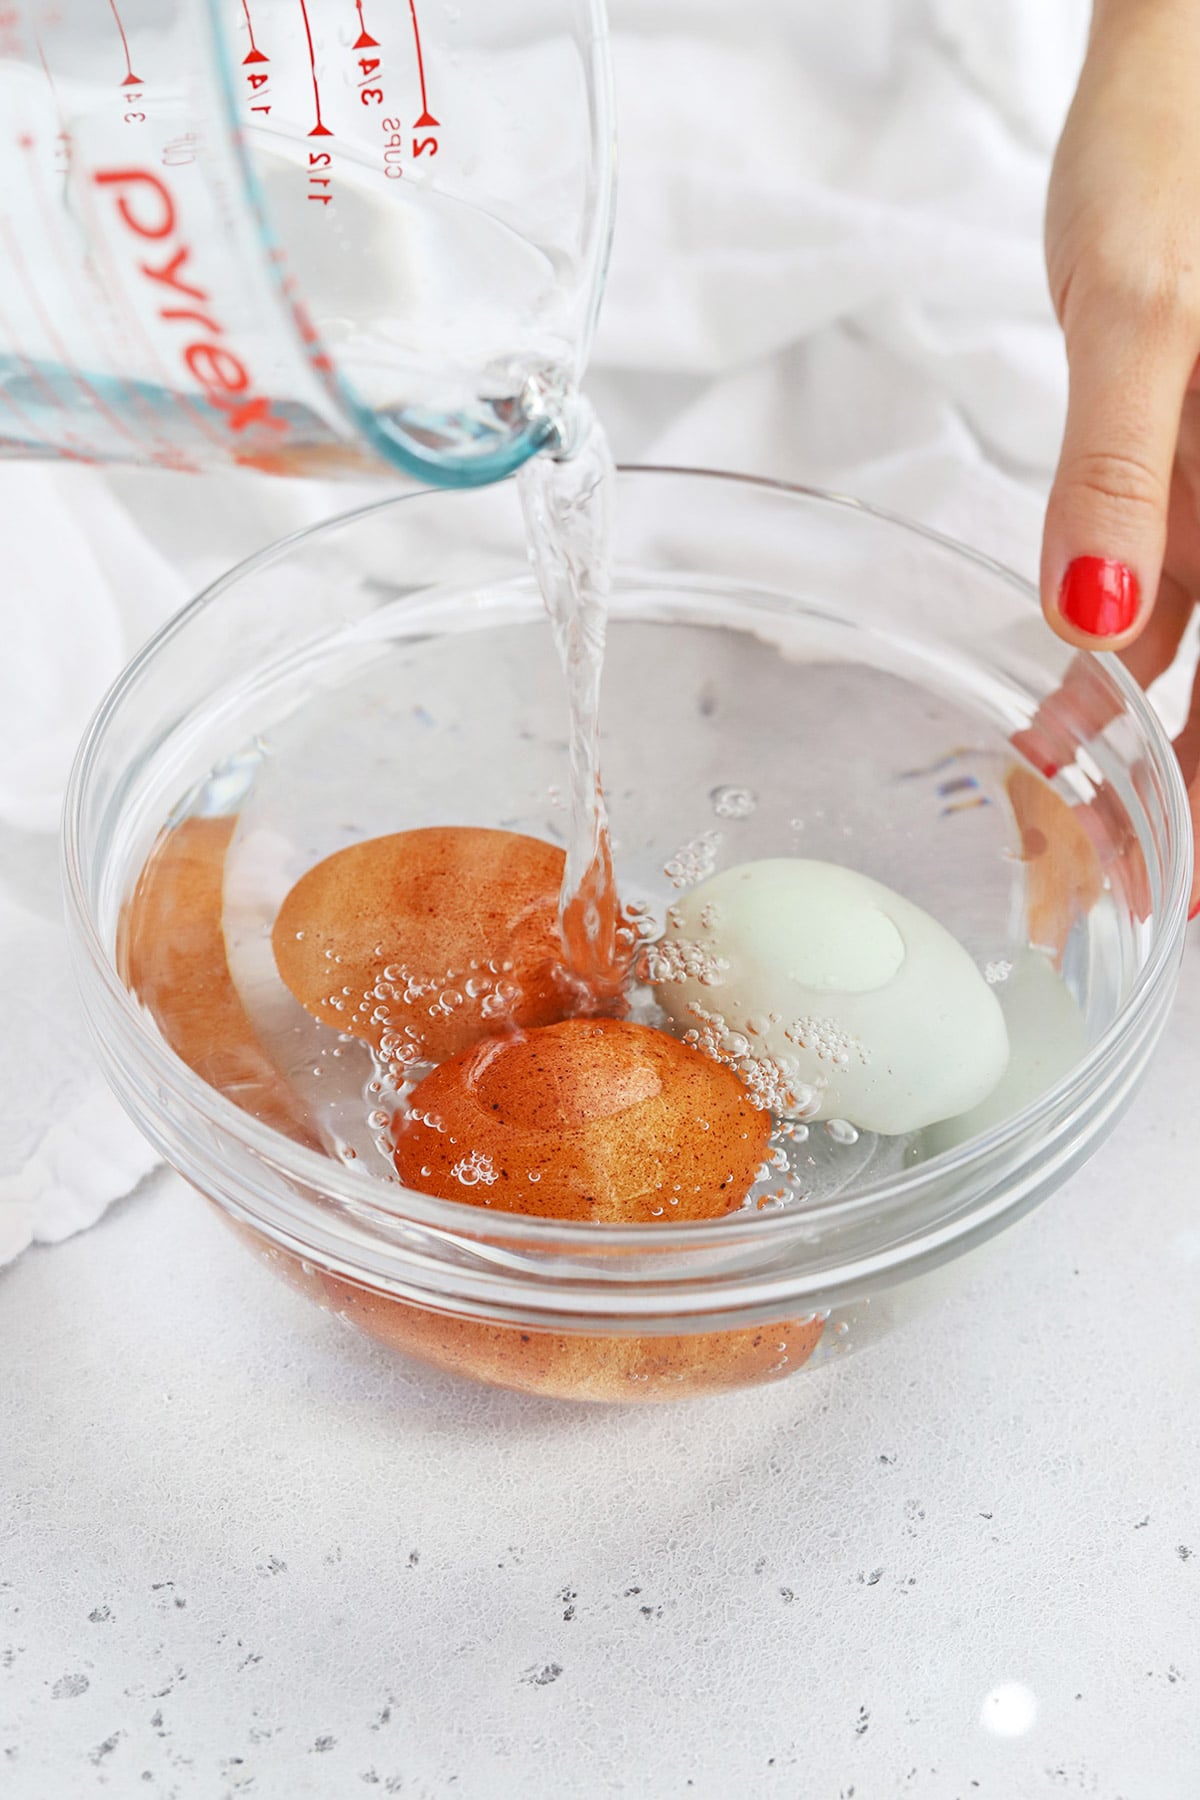 How to Get Eggs To Room Temperature Quickly